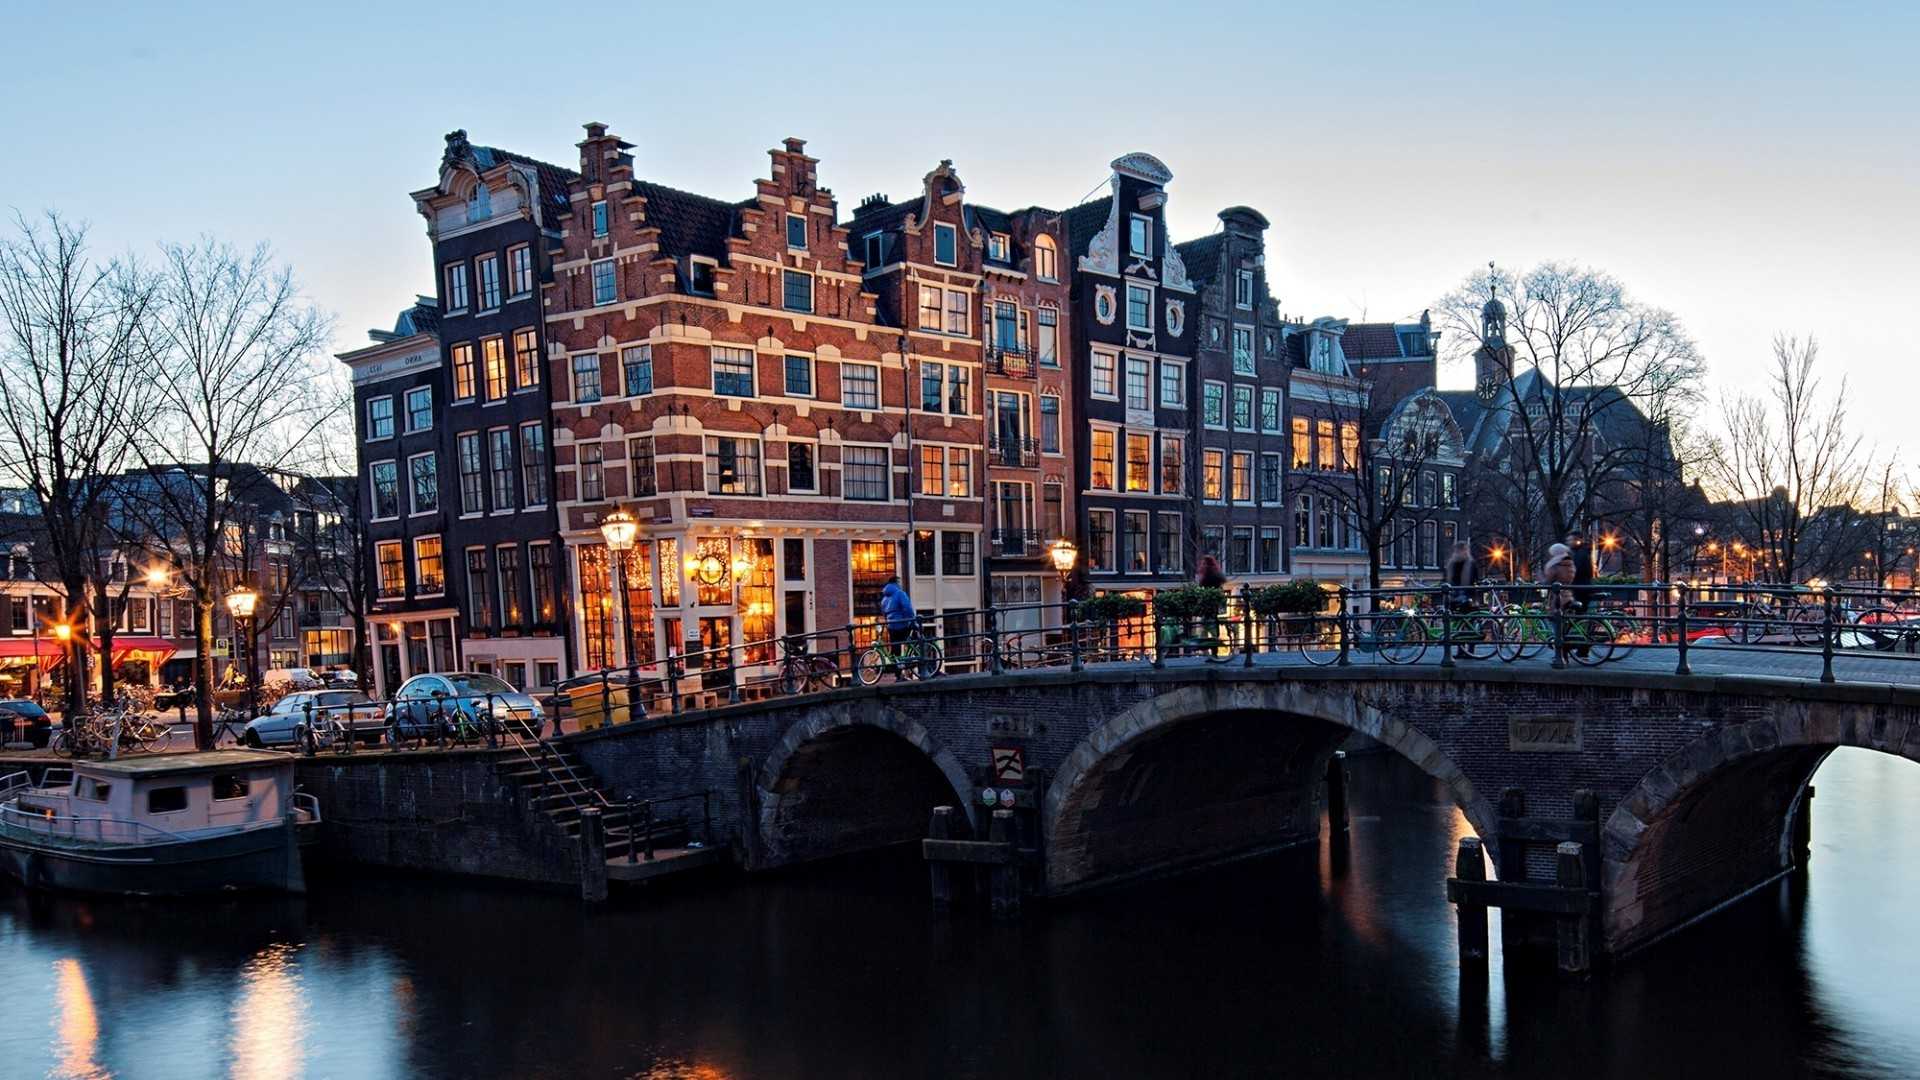 Epic 10 night 11 day itinerary to Amsterdam, Maastricht, Leiden and Rotterdam